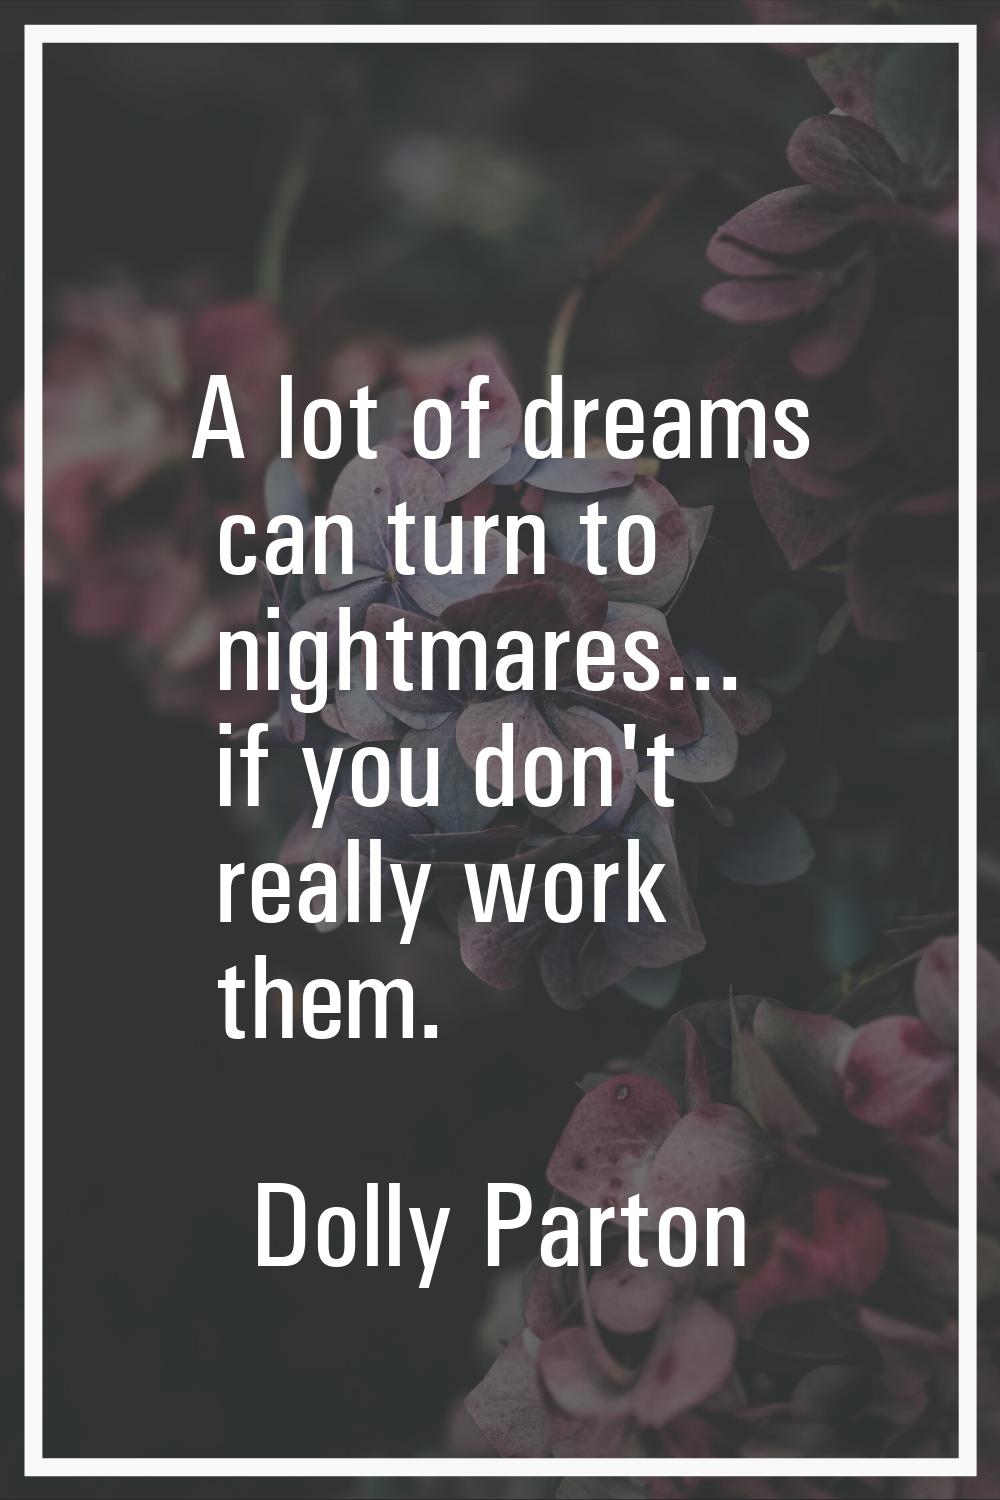 A lot of dreams can turn to nightmares... if you don't really work them.